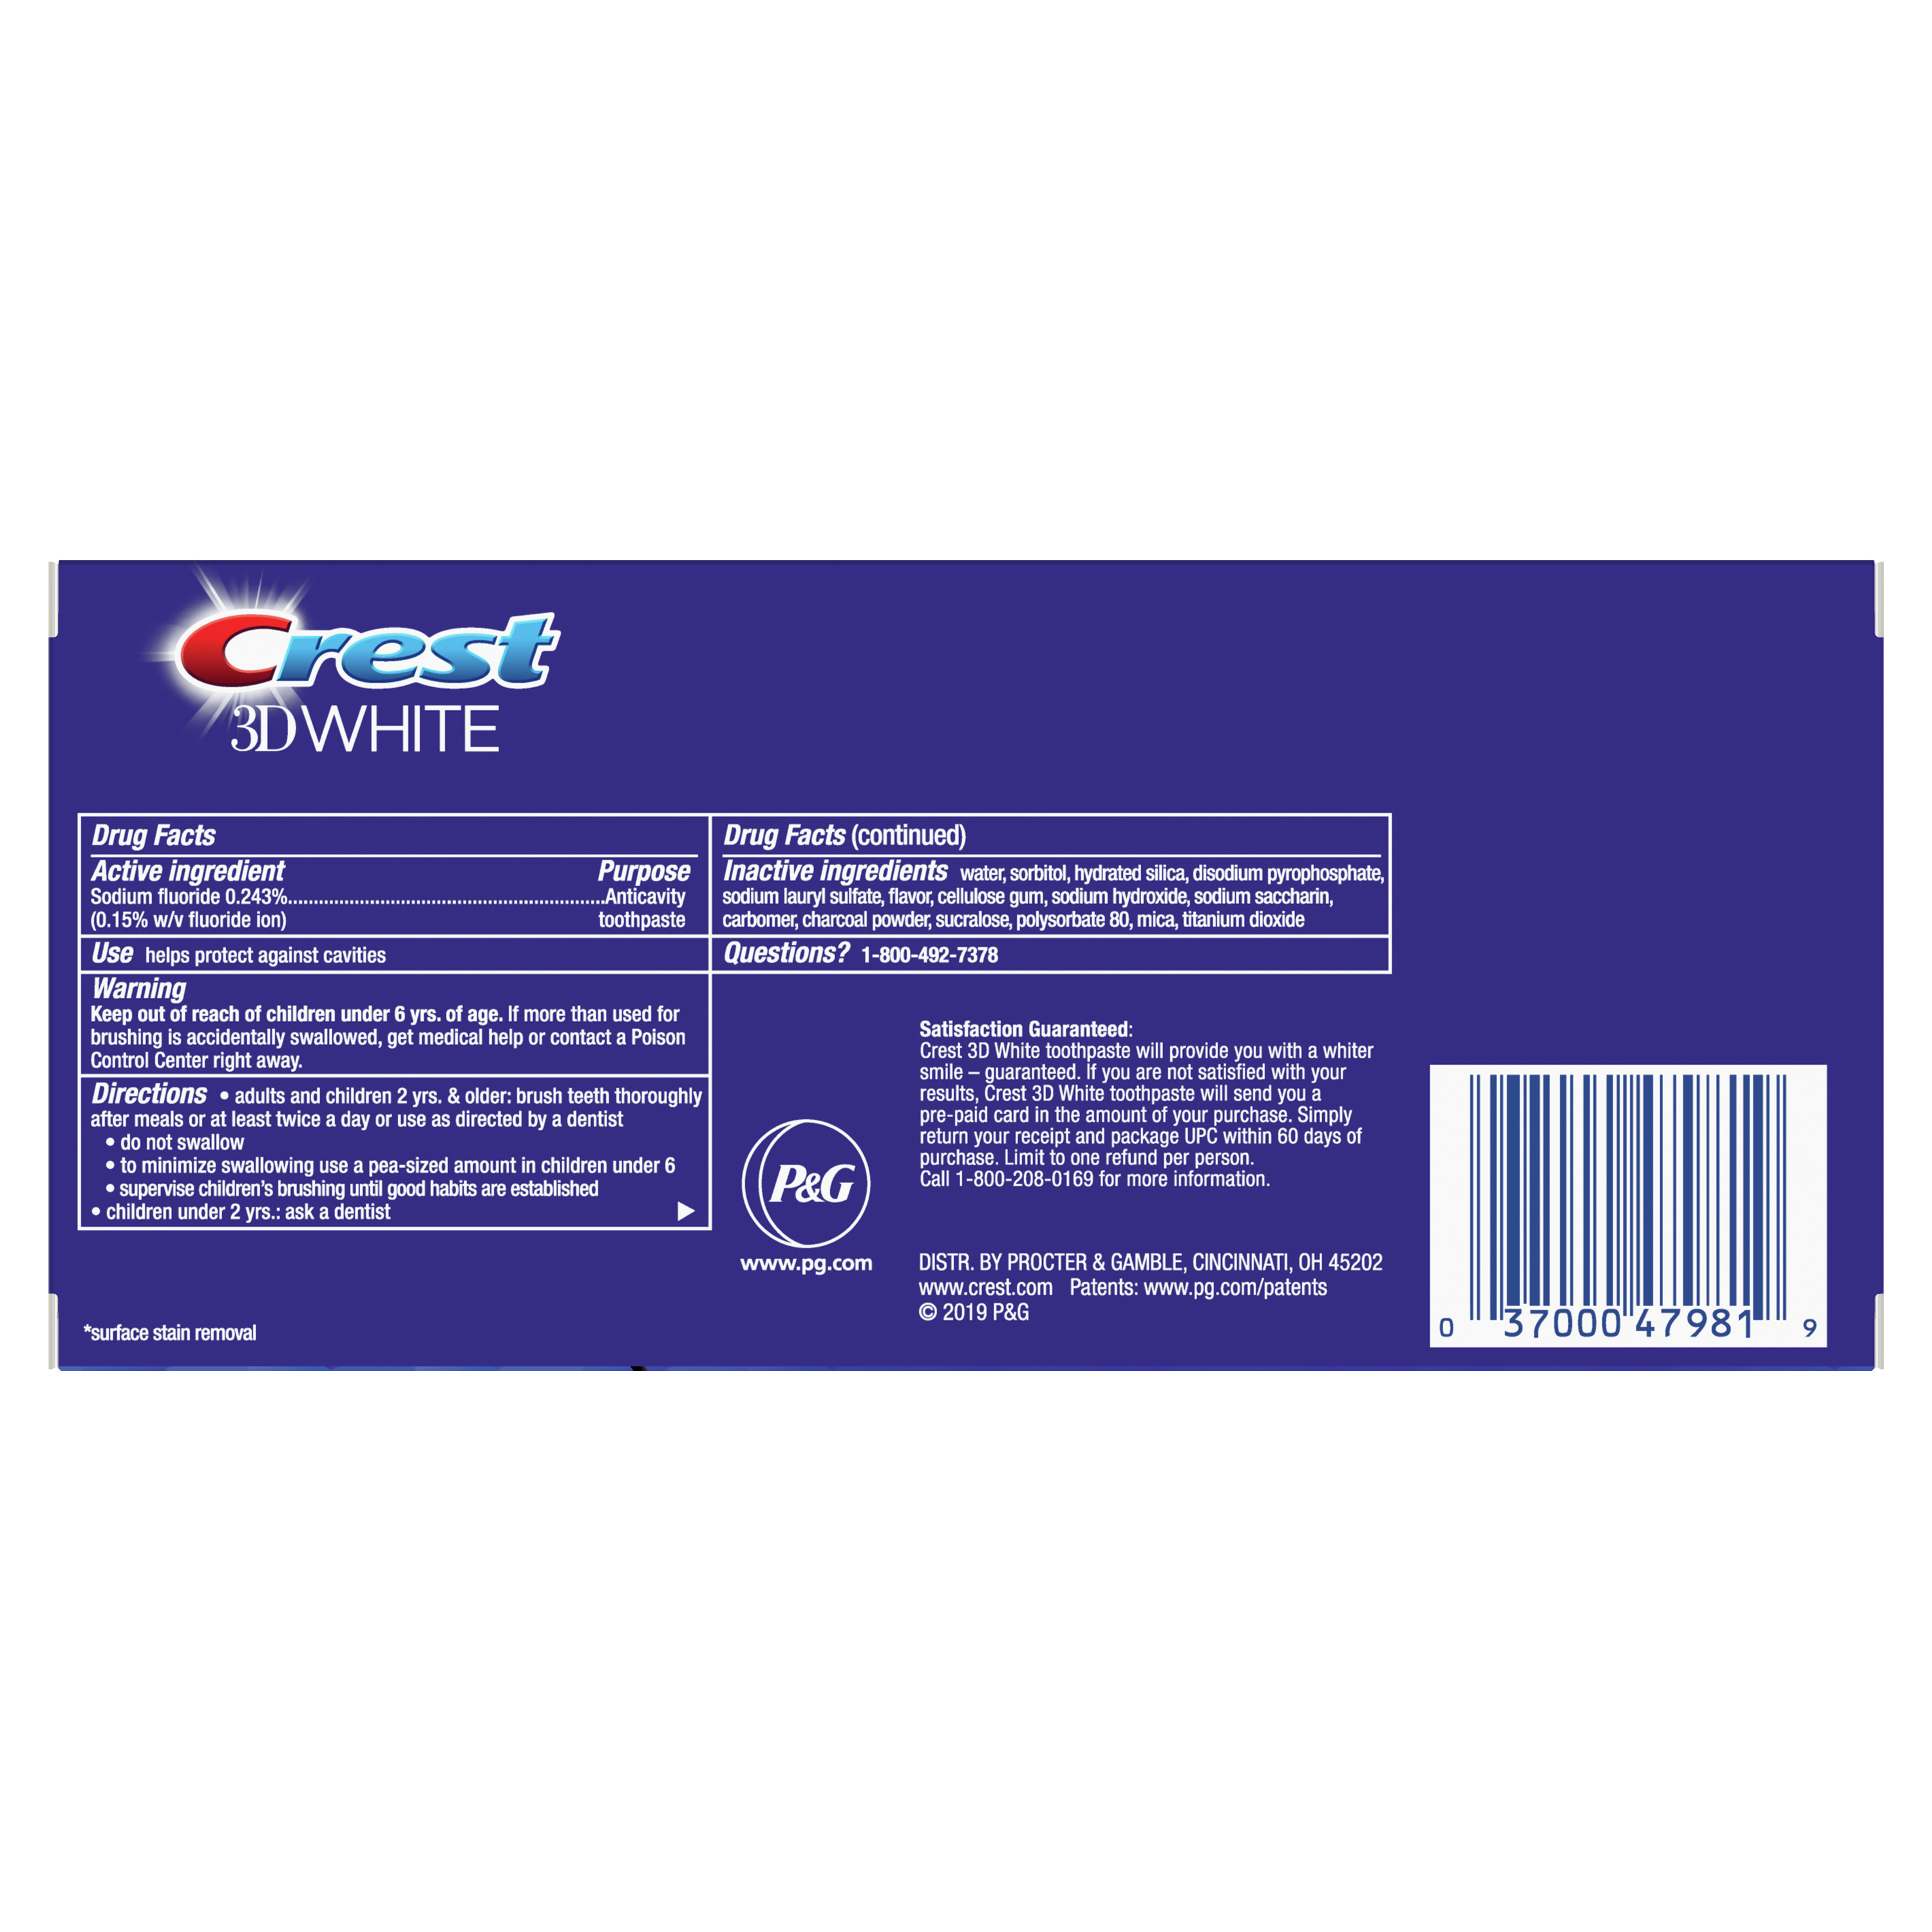 Crest 3D White, Charcoal Whitening Toothpaste, Mint, 4.1 oz, 2 Pk - image 2 of 5